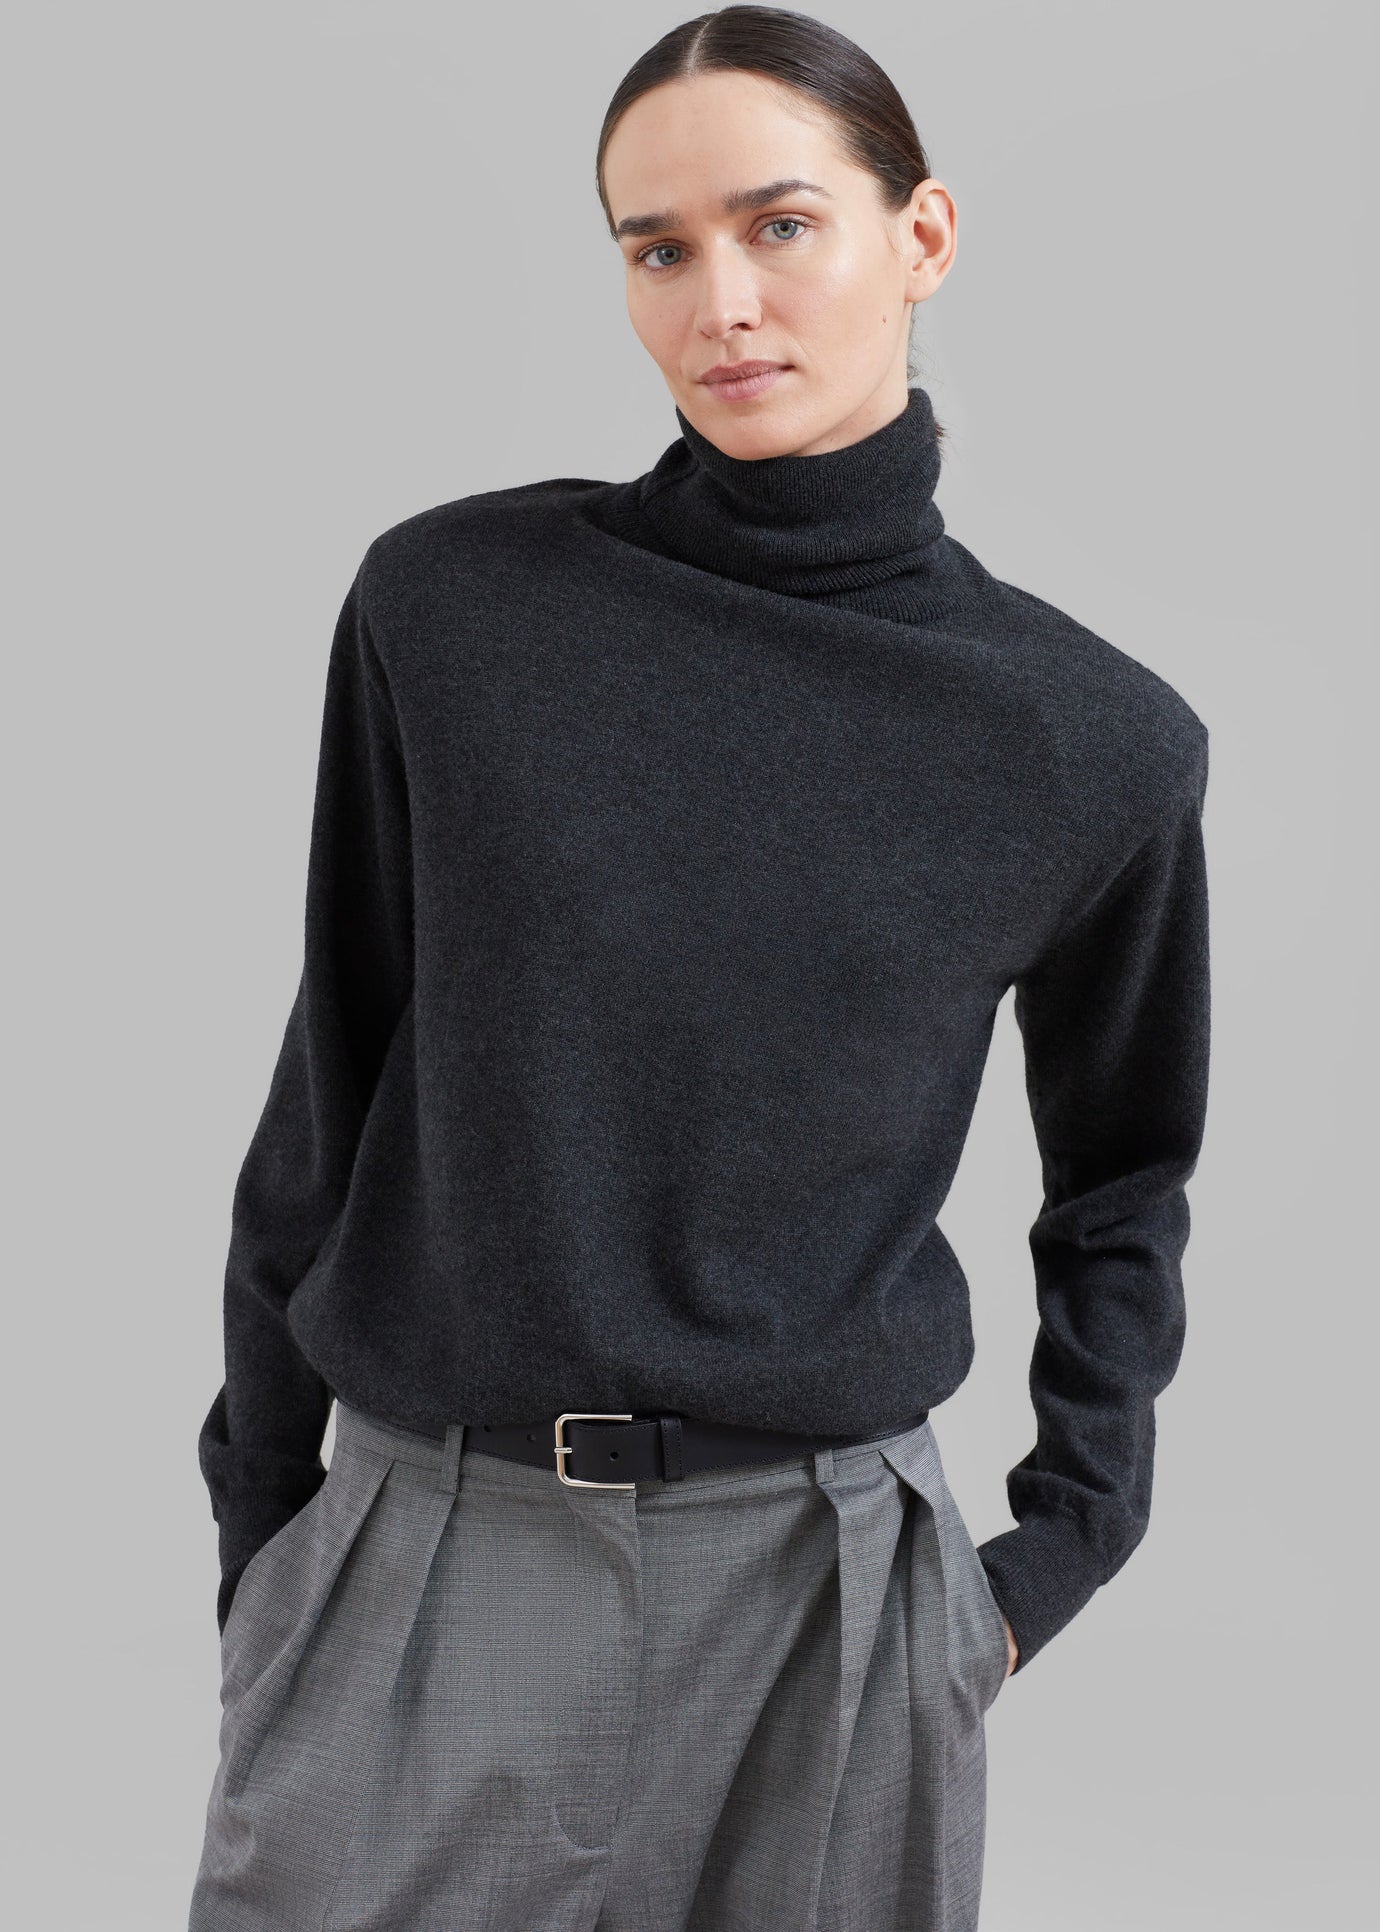 Ines Thin Padded Turtleneck - Charcoal